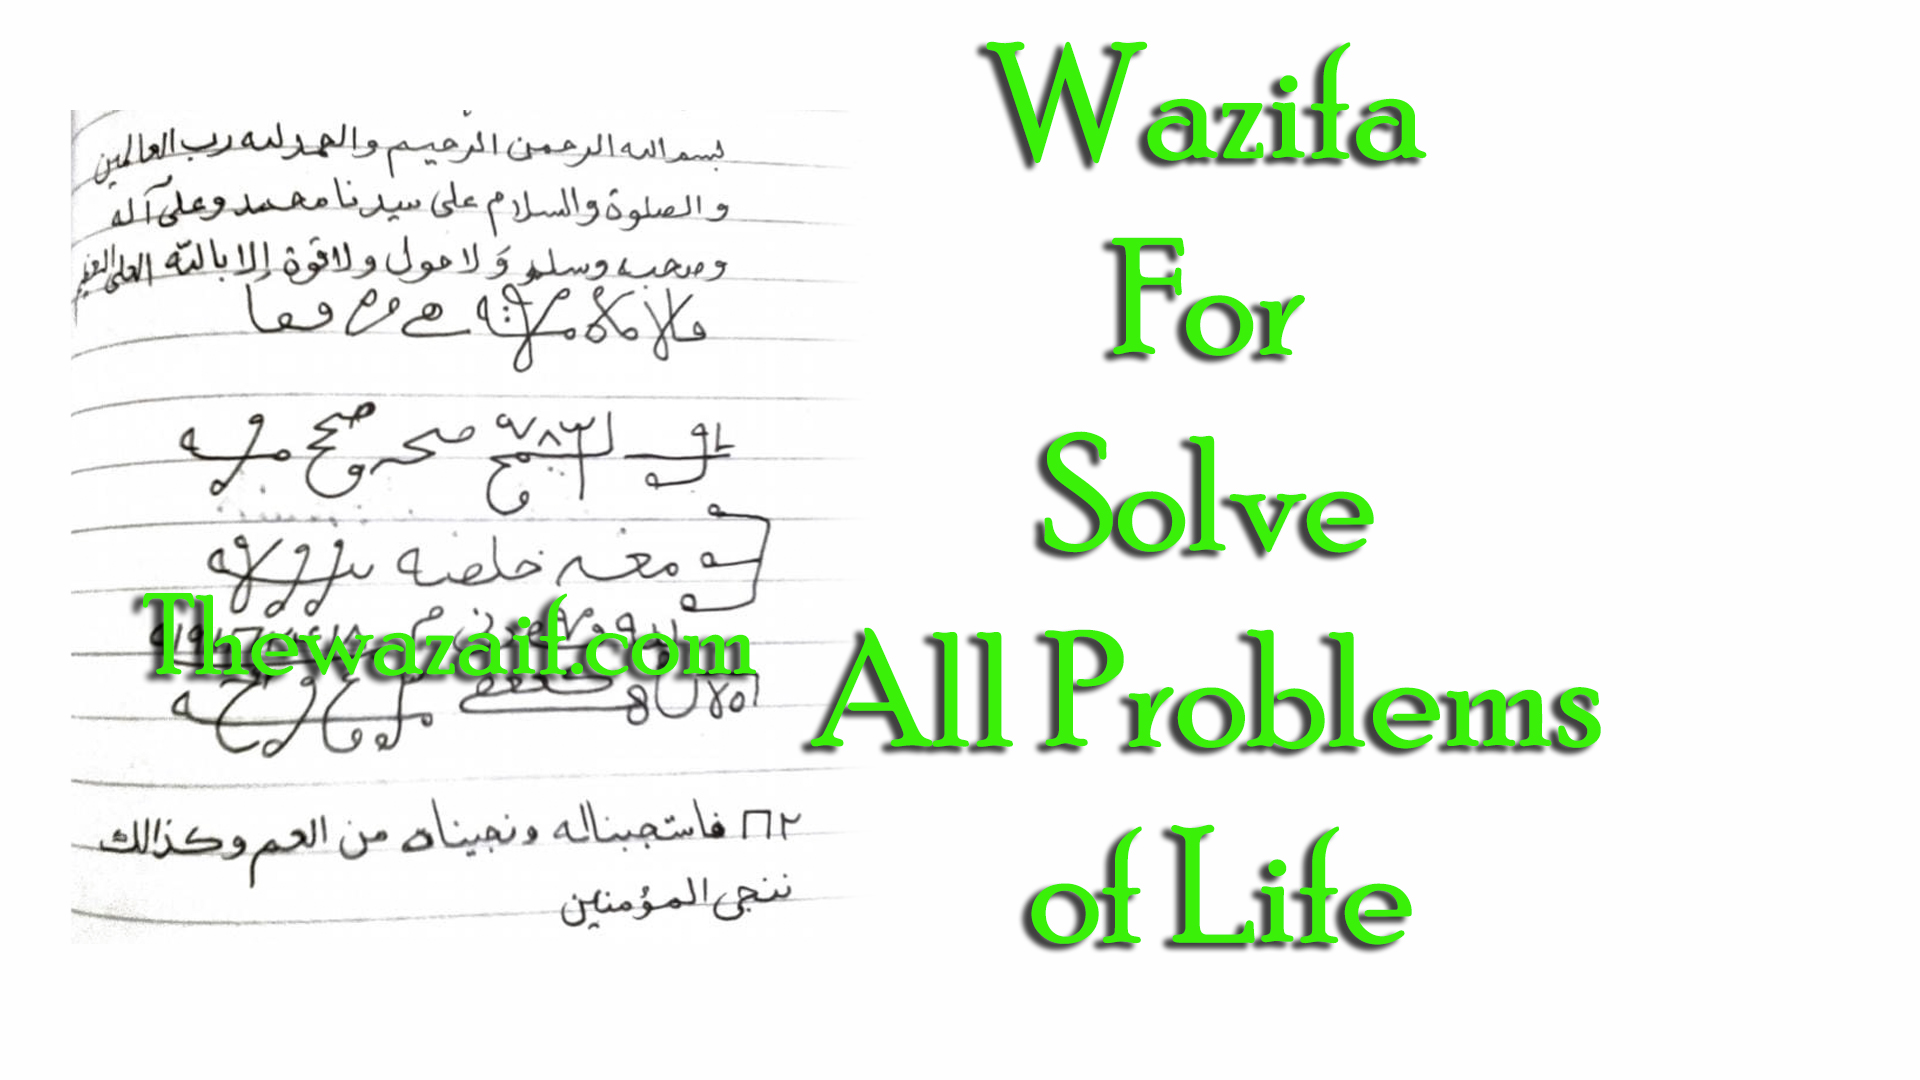 Guaranteed Wazifa For Solve All Problems of Life - in 1 Day